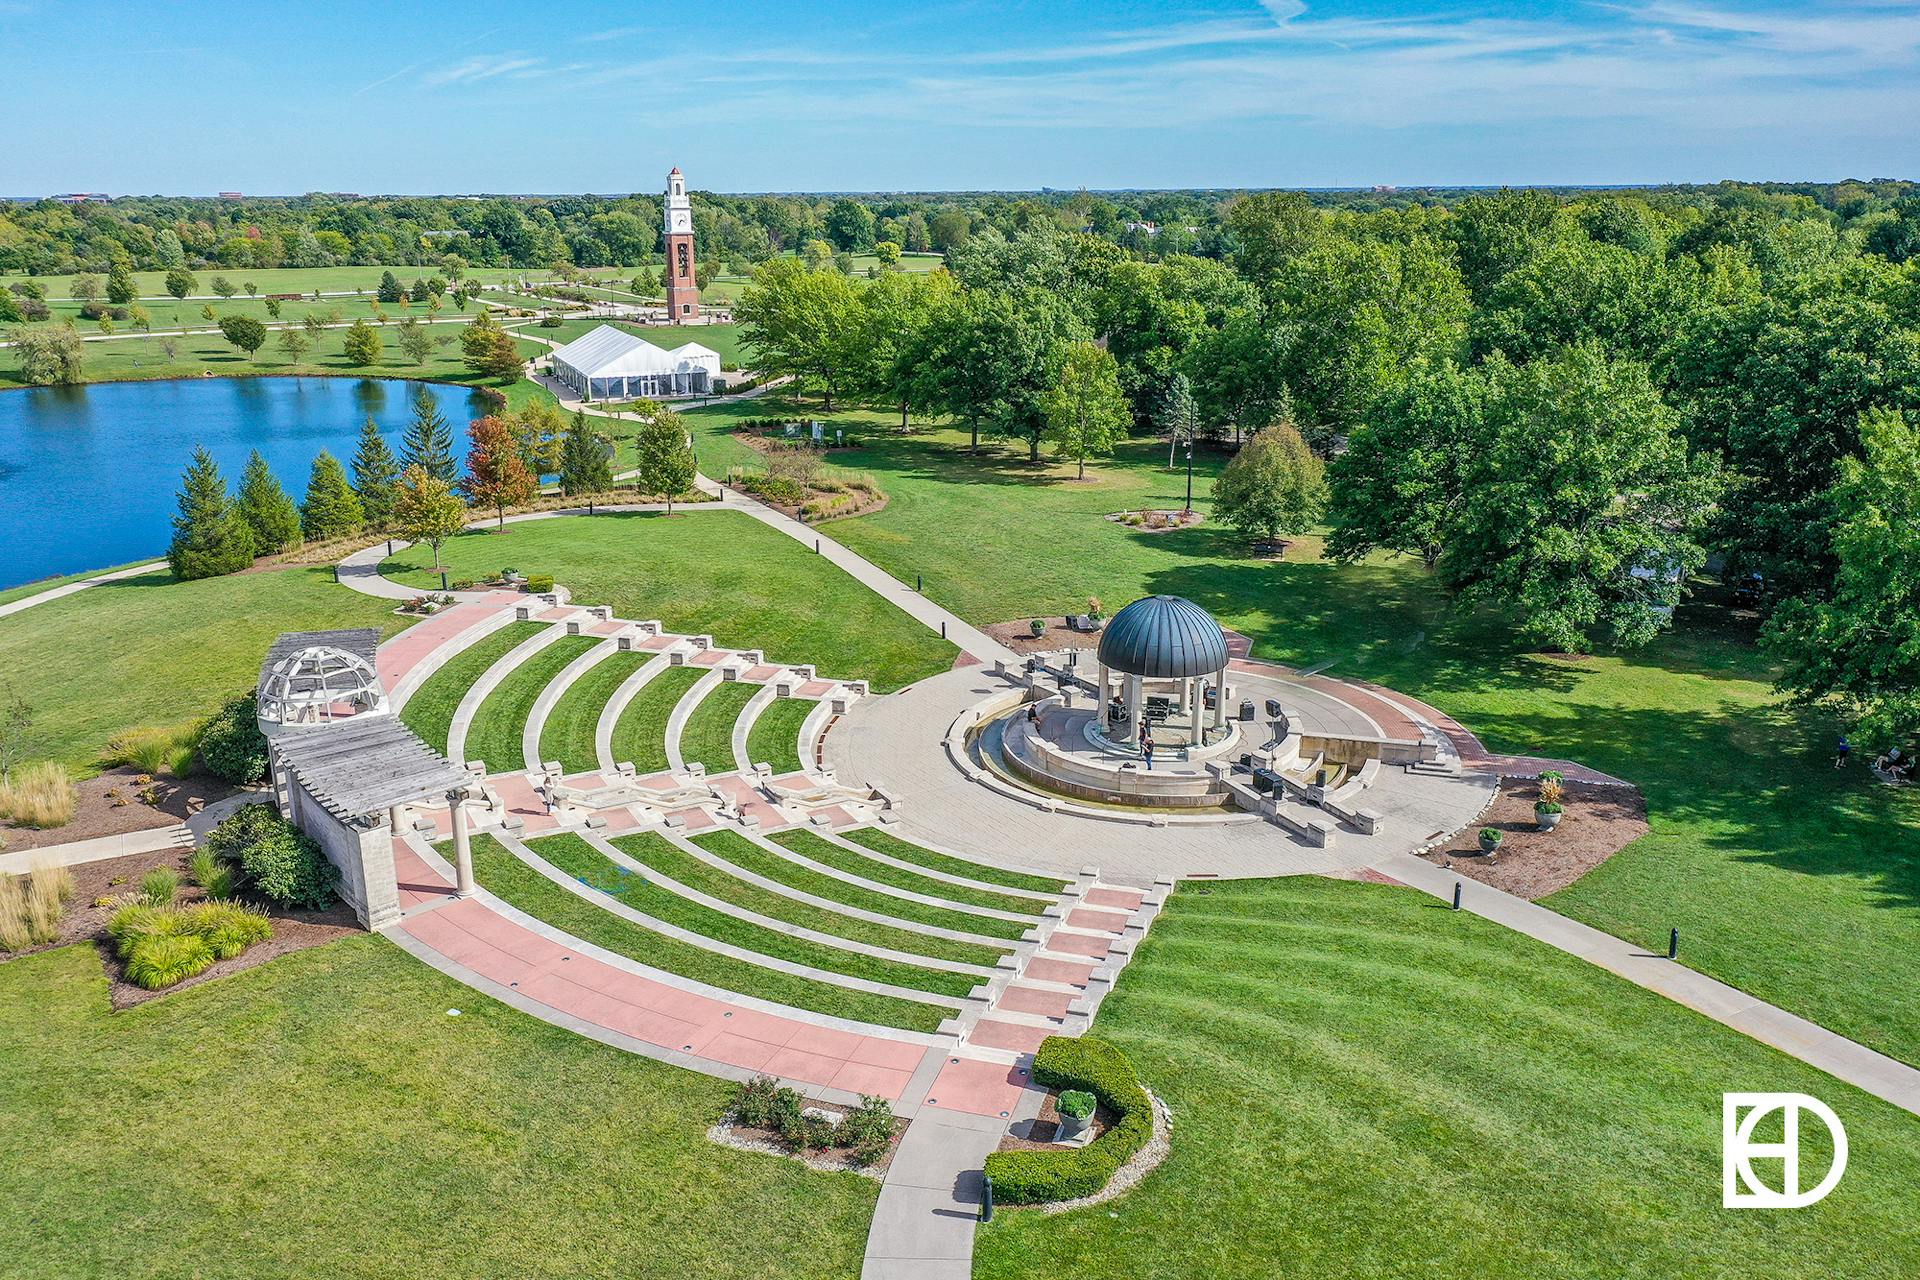 Aerial shot of Centerpiece showing tiered lawn seating and gazebo